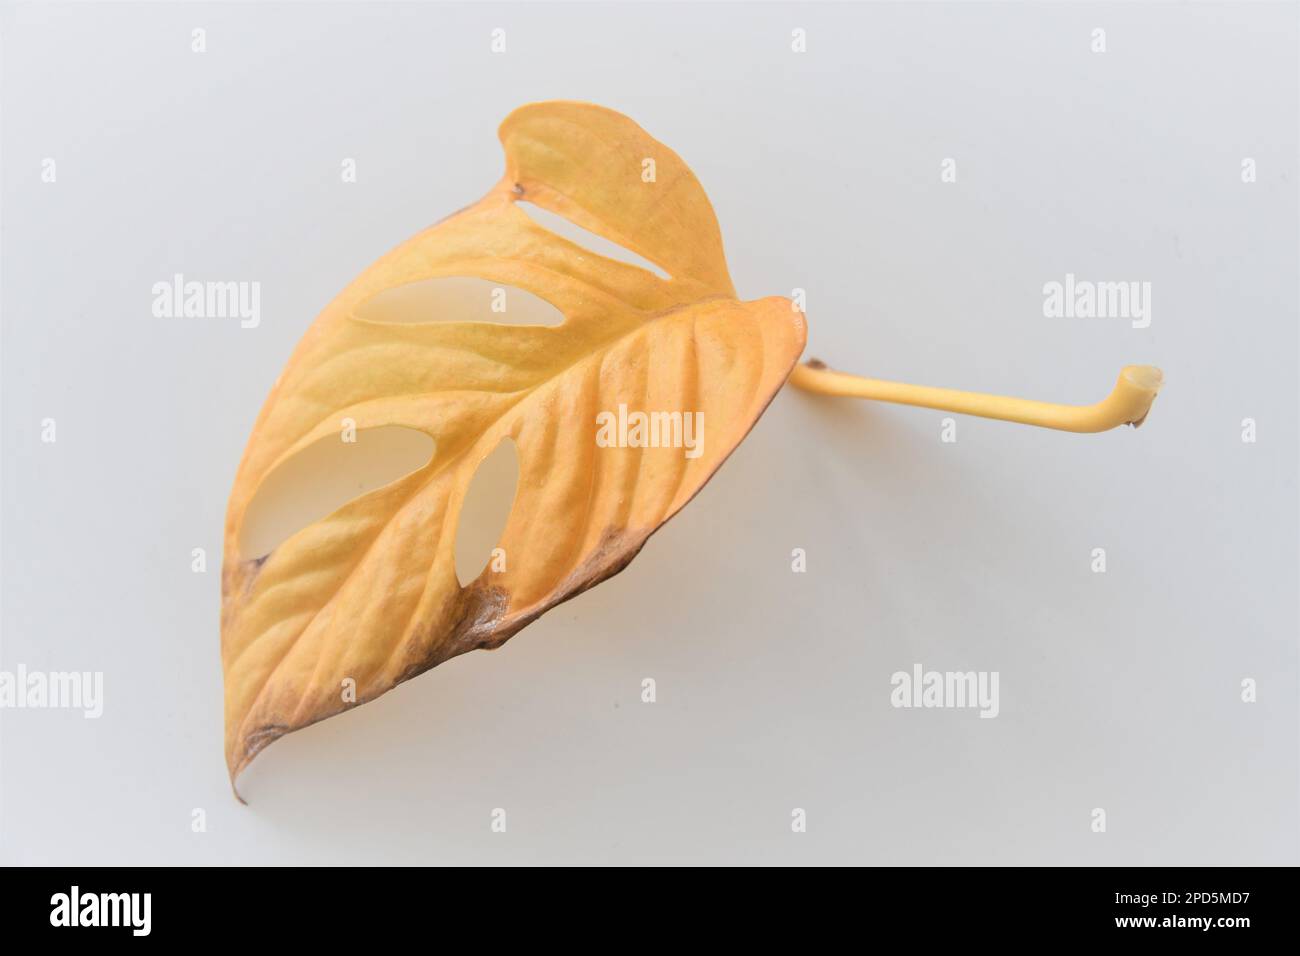 Single dead leaf from monstera adansonii (swiss cheese plant). The leaf is yellow, with holes (perforations), and isolated on a white background. Stock Photo